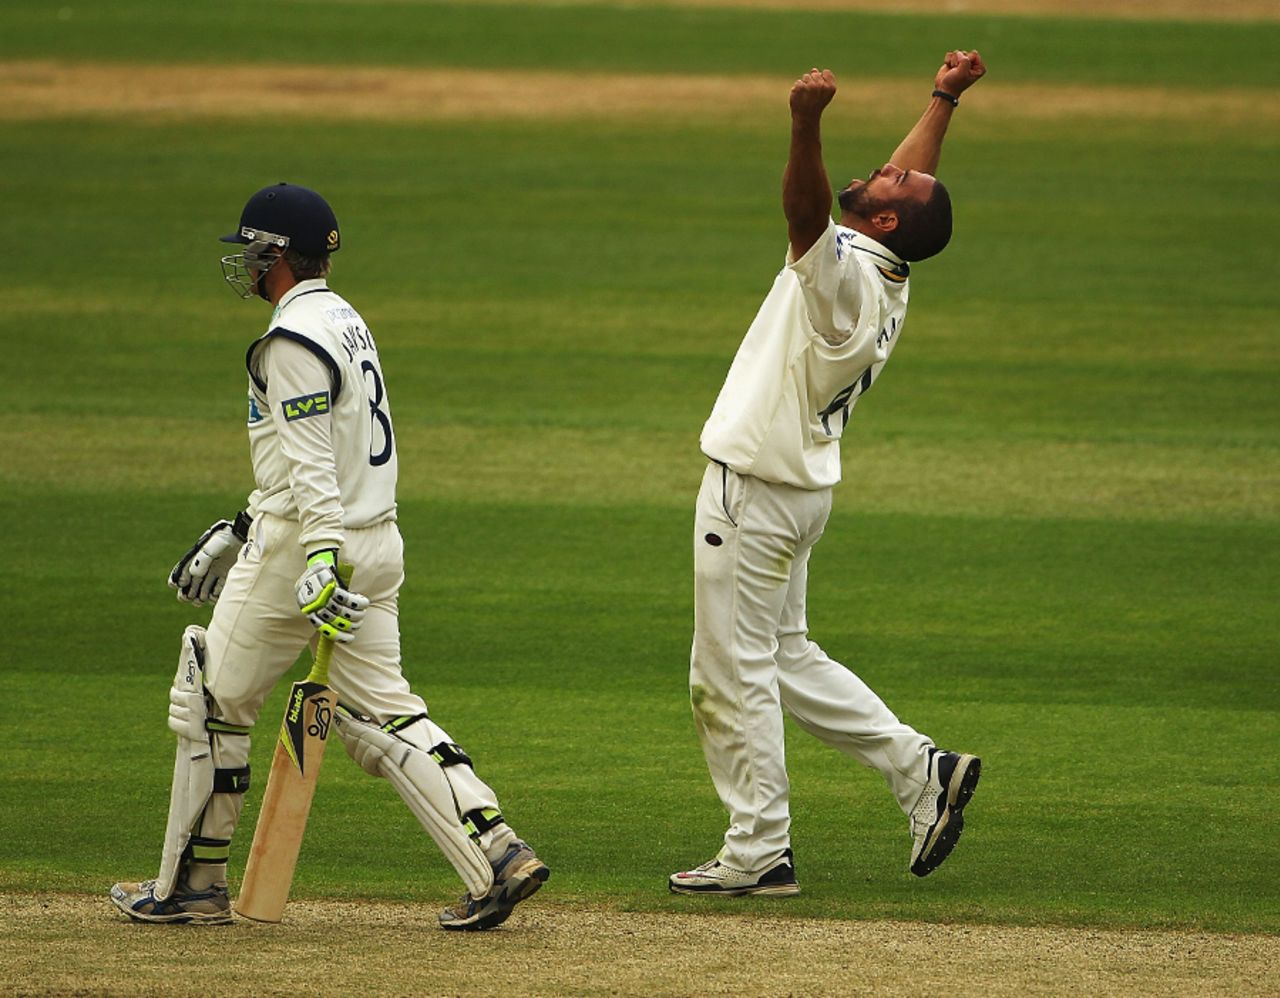 Andre Adams picked up 5 for 54 as Hampshire were kept to 218, Nottinghamshire v Hampshire, County Championship, Nottingham, April 14, 2011